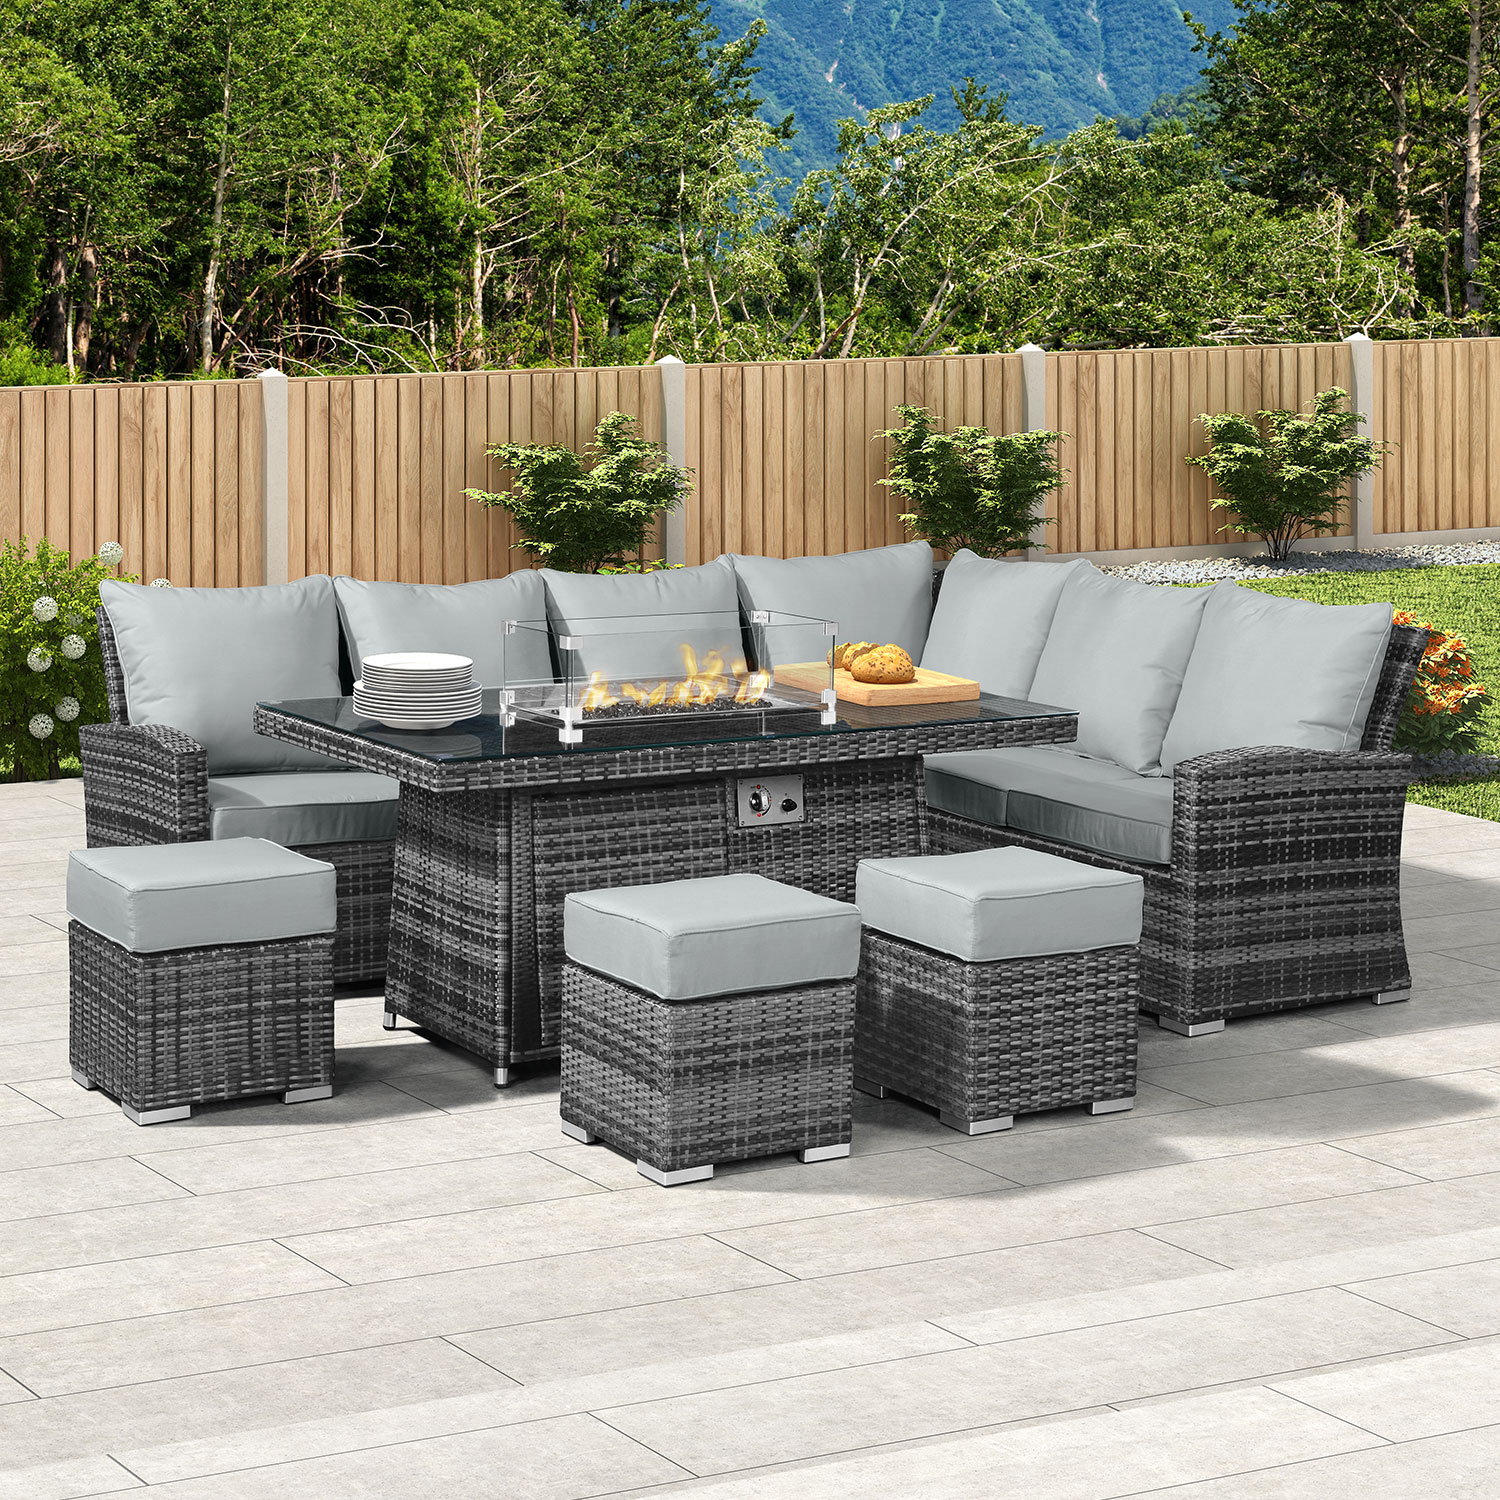 Hand Rattan Corner Sofa Dining Set, Large Round Outdoor Dining Table With Fire Pit